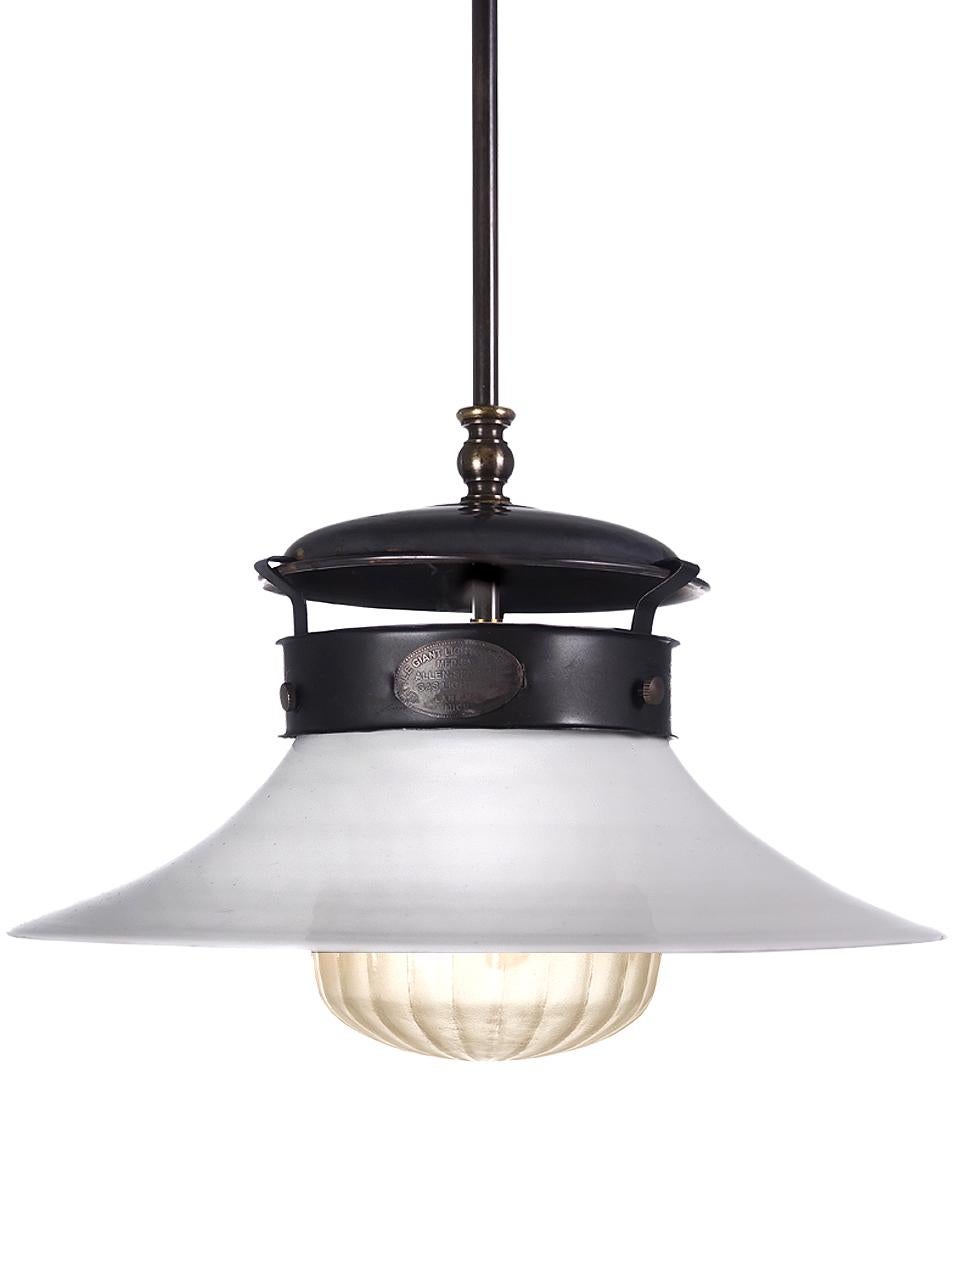 These early utilitarian style gas lamps were the type found in 1800s general stores and train platforms. We were inspired by their simple and elegant look when this collection was created. They have the feel of a gas lamp but are wired for a